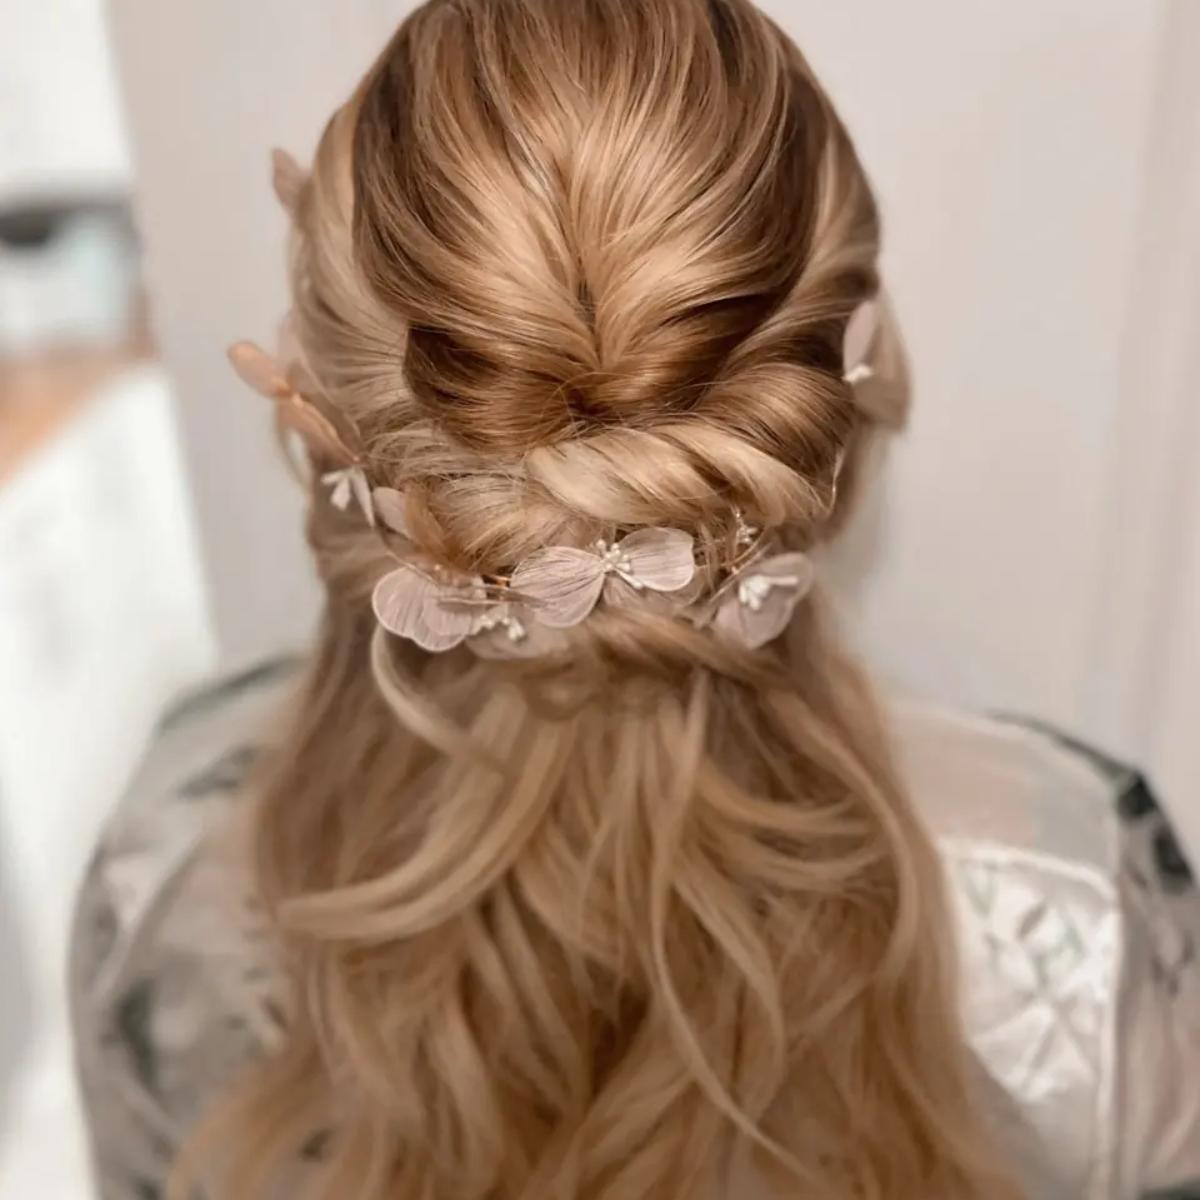 32 Half-Up, Half-Down Hairstyles For Any Occasion